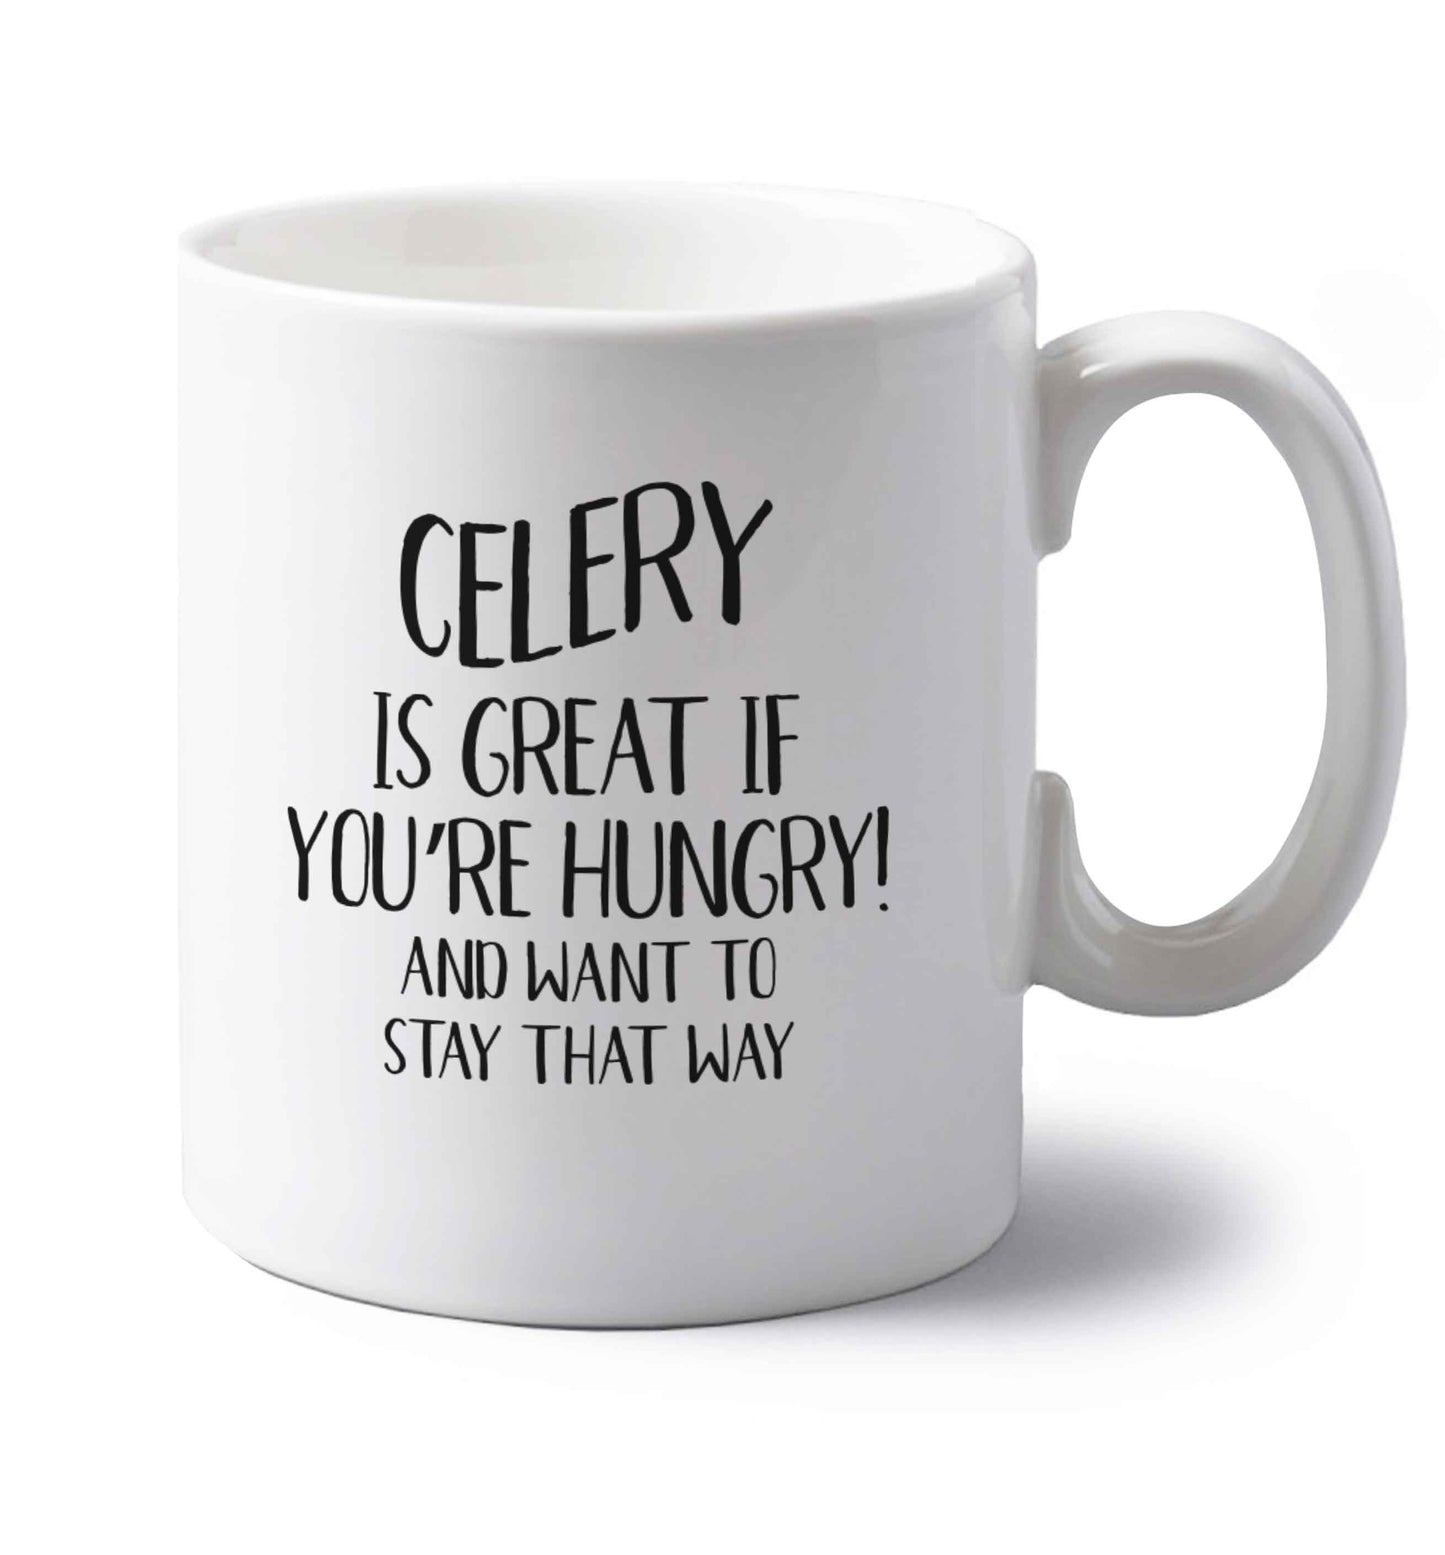 Cellery is great when you're hungry and want to stay that way left handed white ceramic mug 